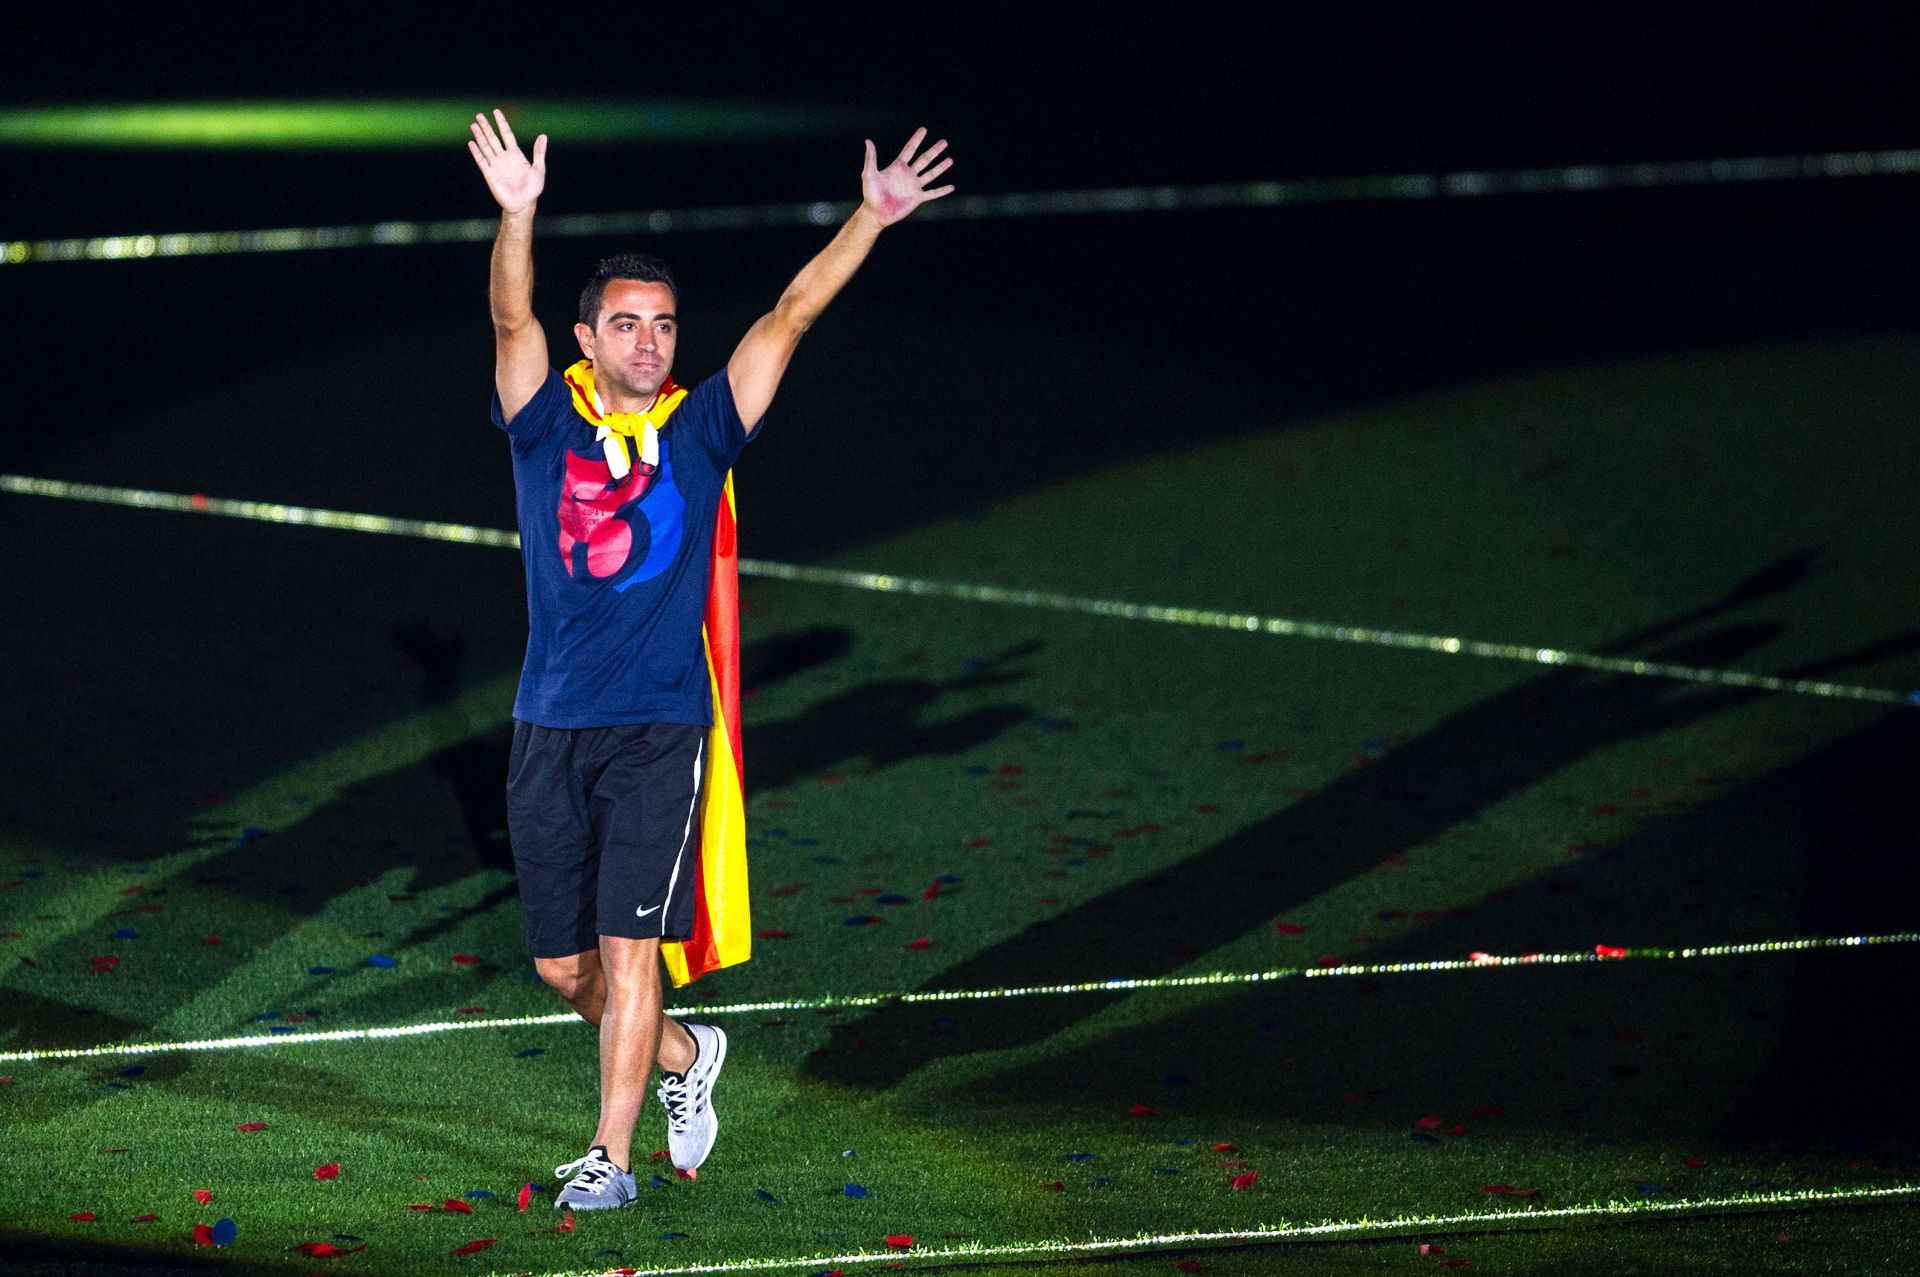 Xavi celebrating during his time as a player at FC Barcelona.